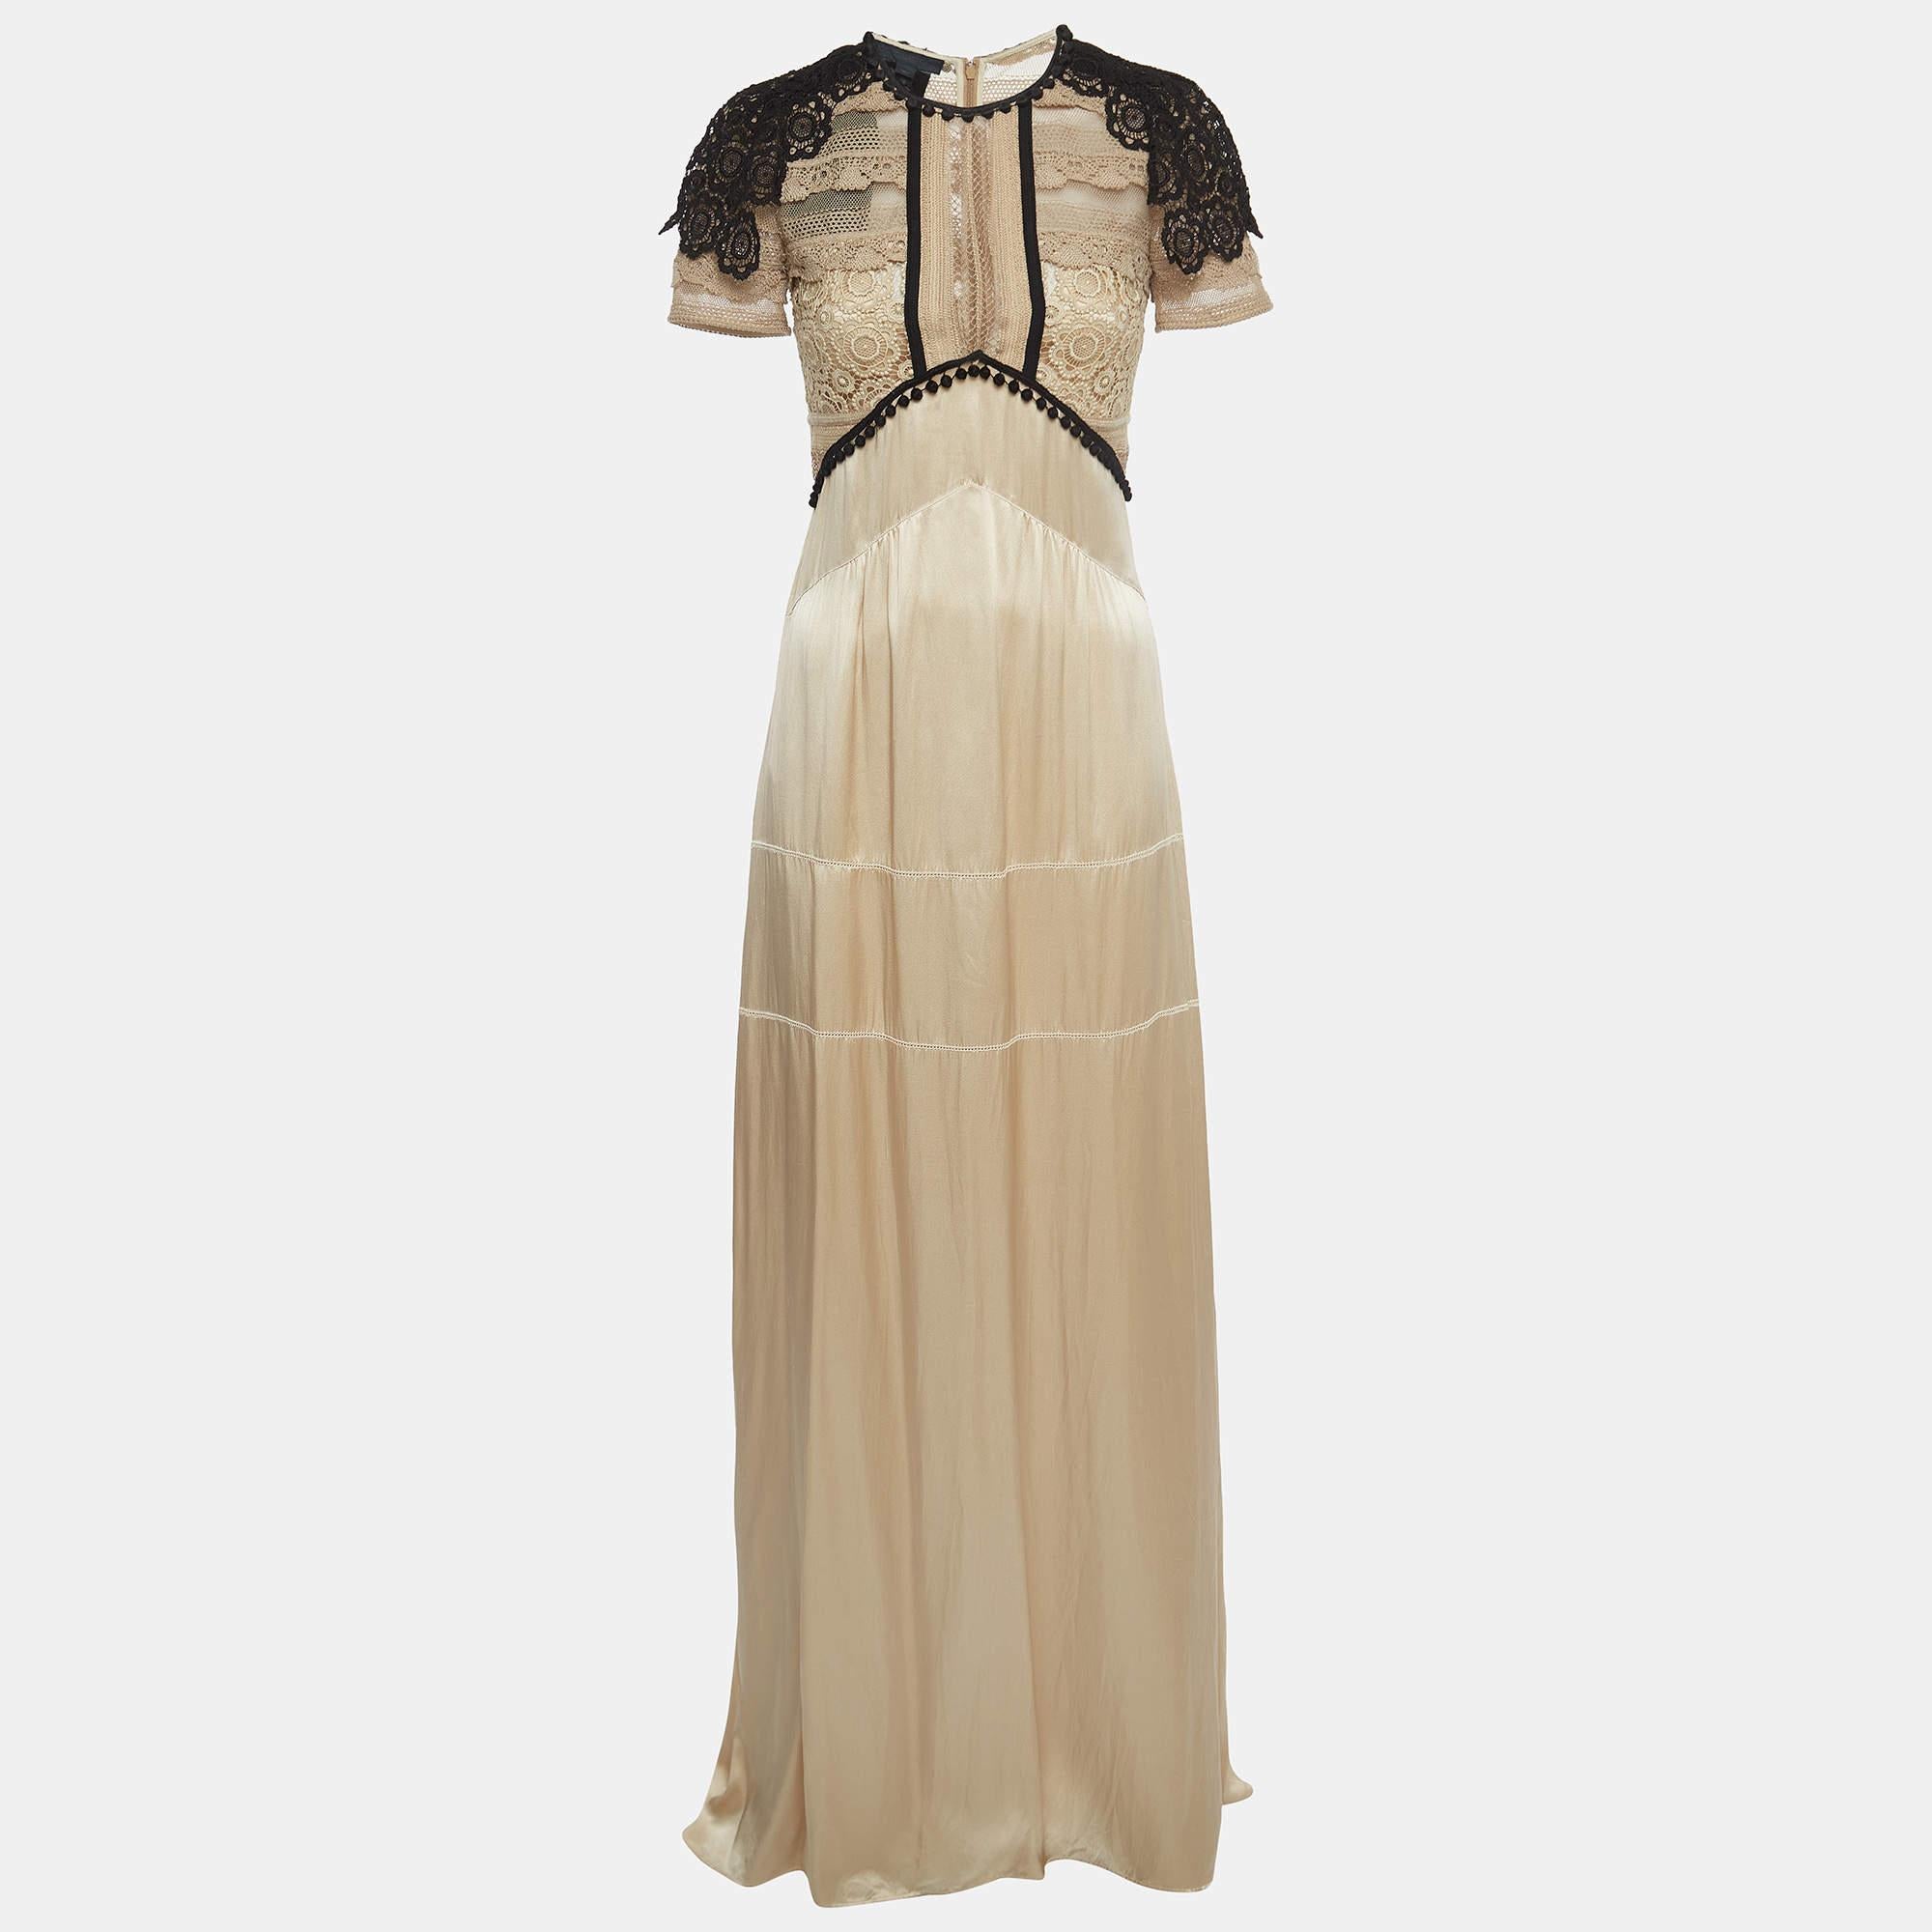 The Burberry dress exudes timeless elegance. Crafted from luxurious silk, its flowing silhouette and intricate lace detailing create a harmonious blend of sophistication and sensuality. The semi-sheer design adds a touch of allure, making it a